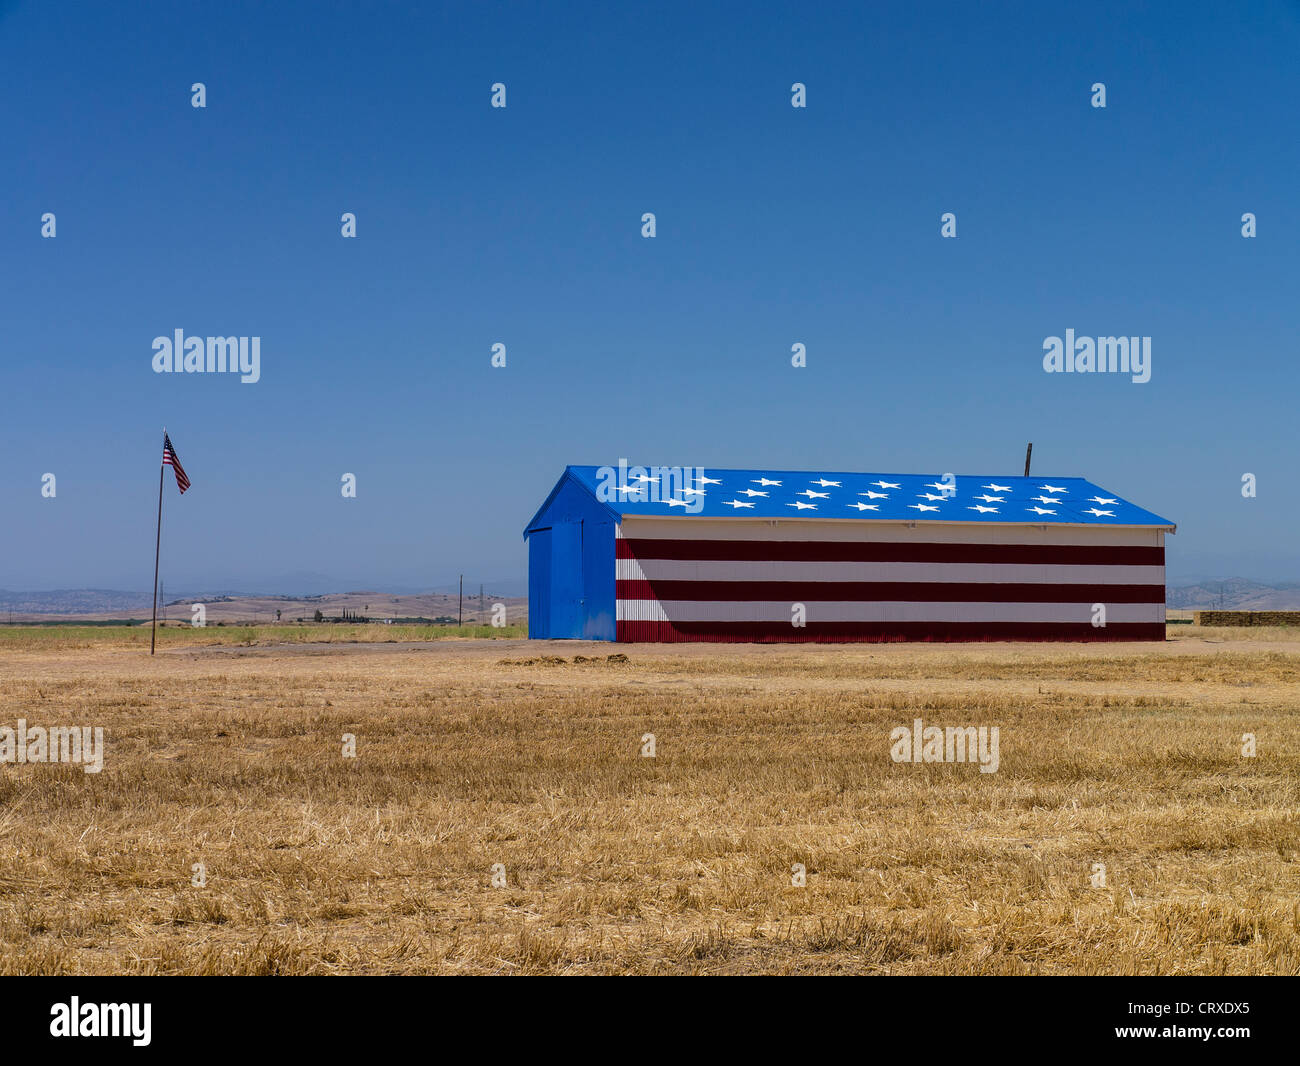 A rural Central Valley of California barn painted with stars and stripes to resemble the flag of the United States of America. Stock Photo